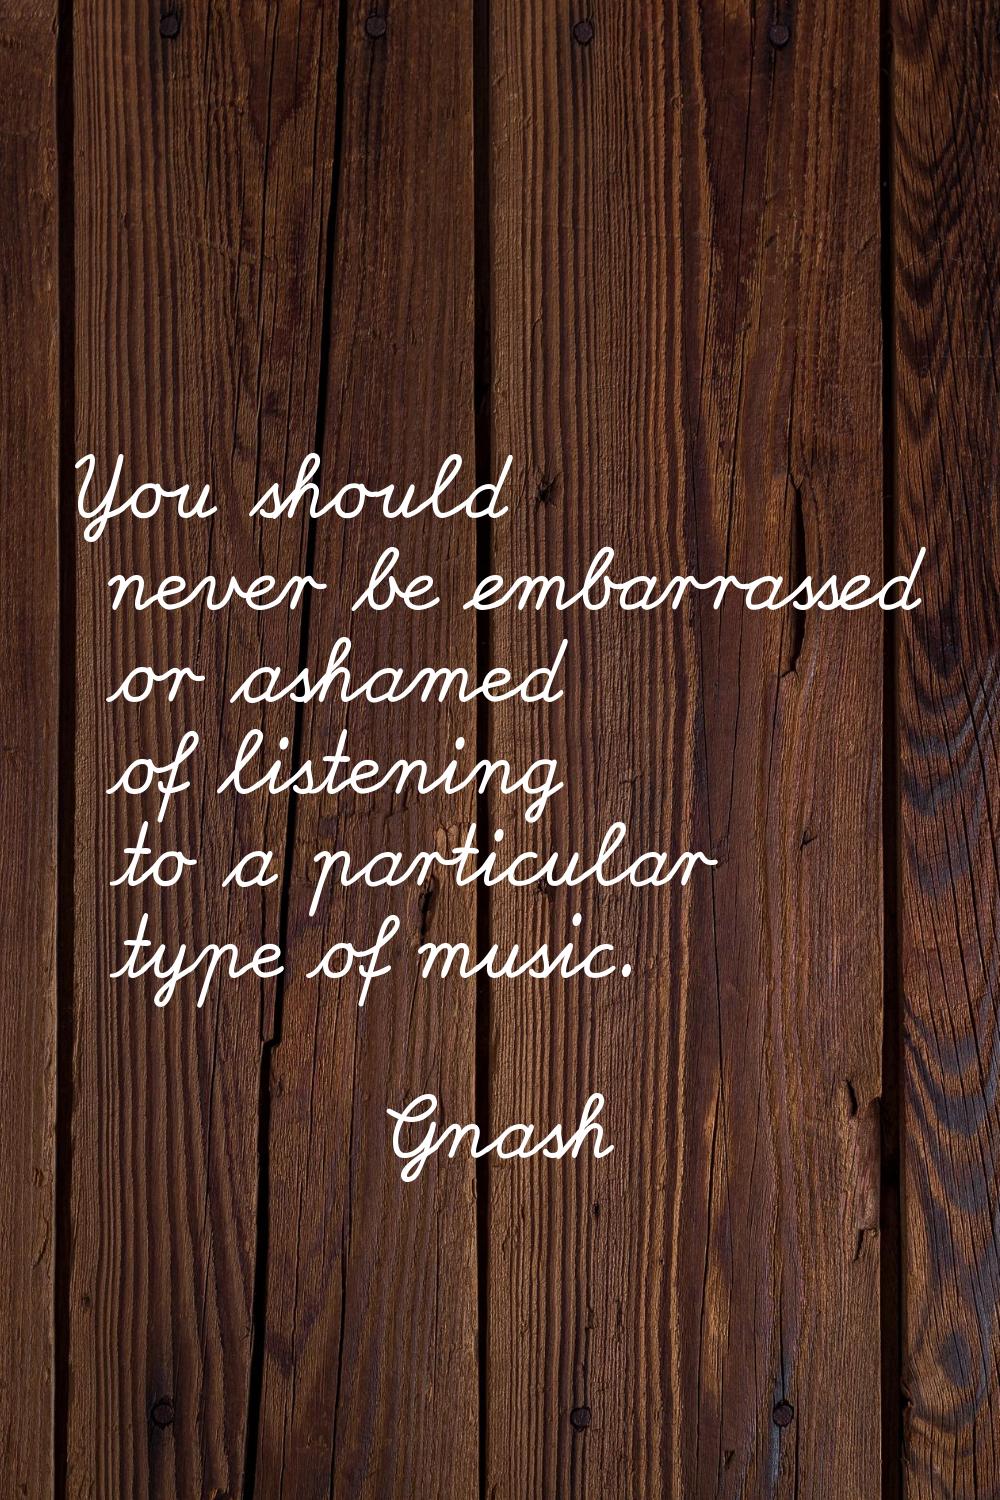 You should never be embarrassed or ashamed of listening to a particular type of music.